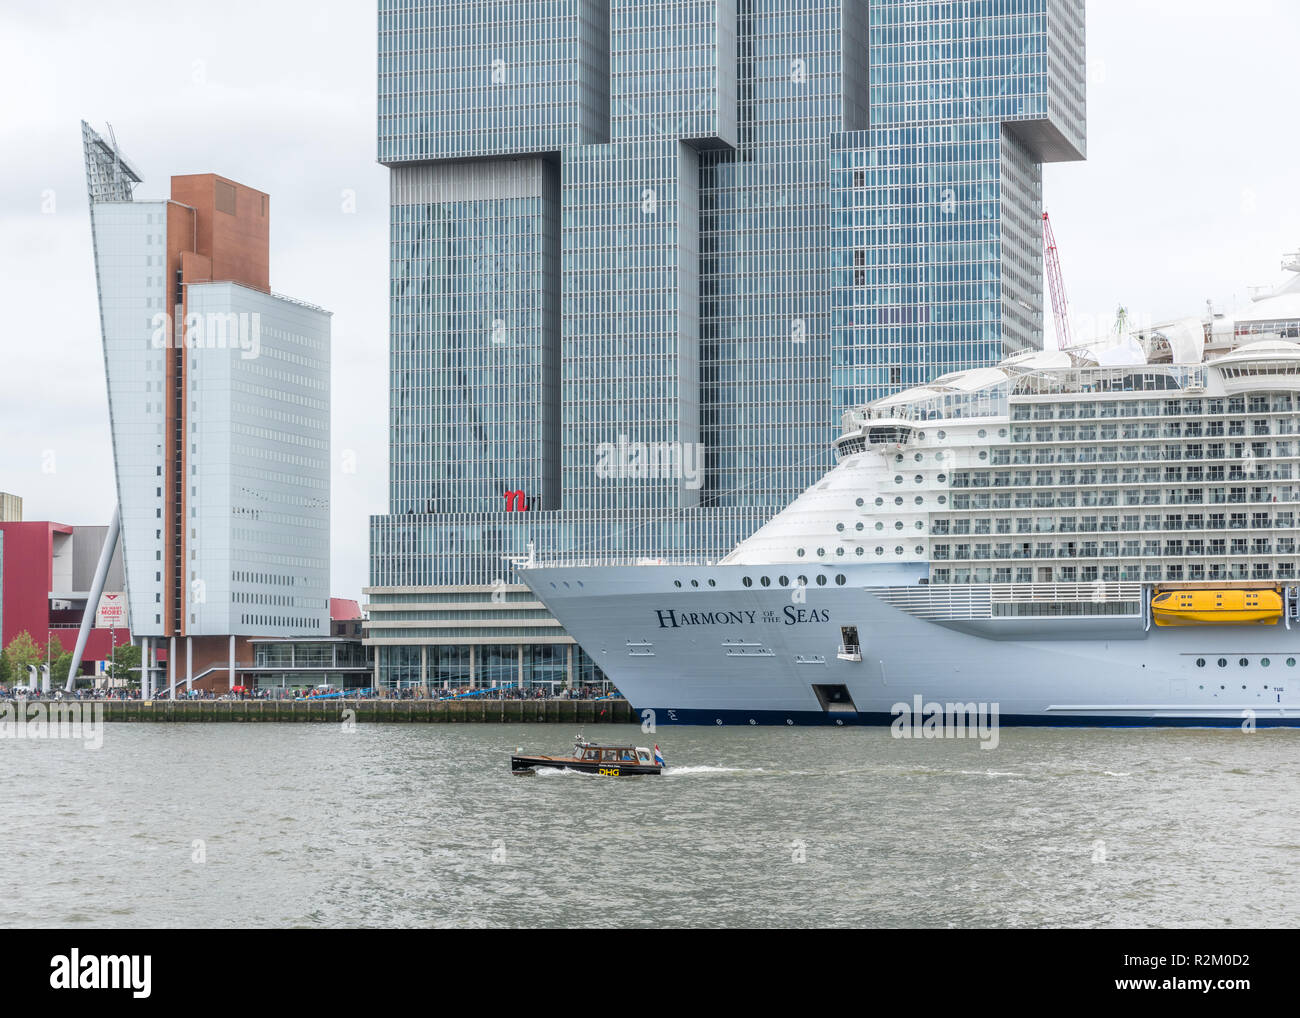 ROTTERDAM, THE NETHERLANDS - MAY 24, 2016: The largest cruise ship in the world Harmony of the Seas moored at the Wilhelminapier in Rotterdam on May 2 Stock Photo